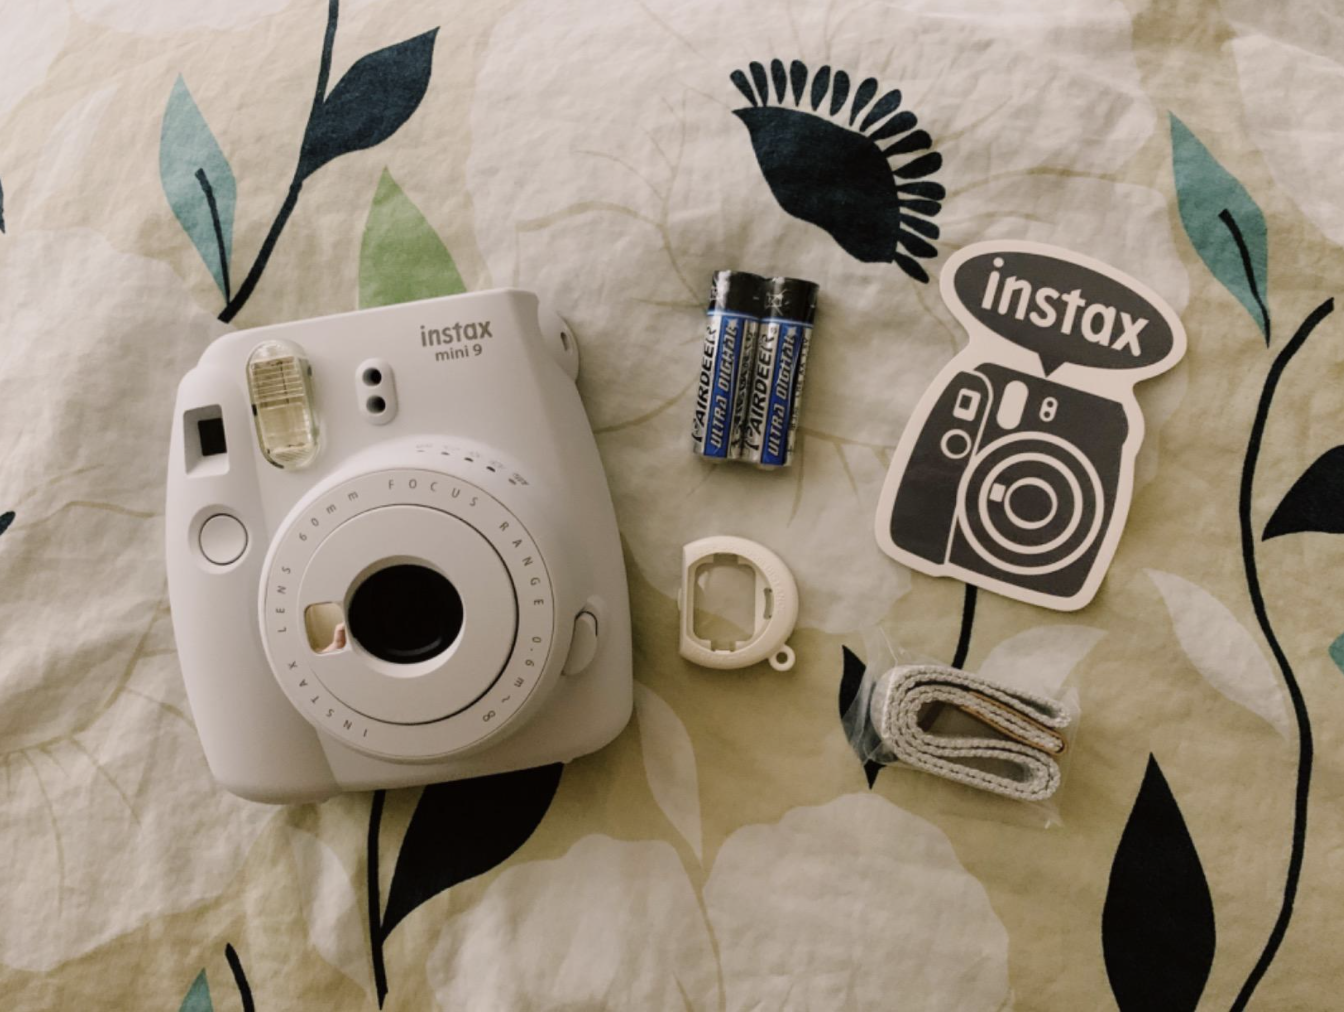 the Instax camera in white with batteries, camera and strap displayed on a bedspread